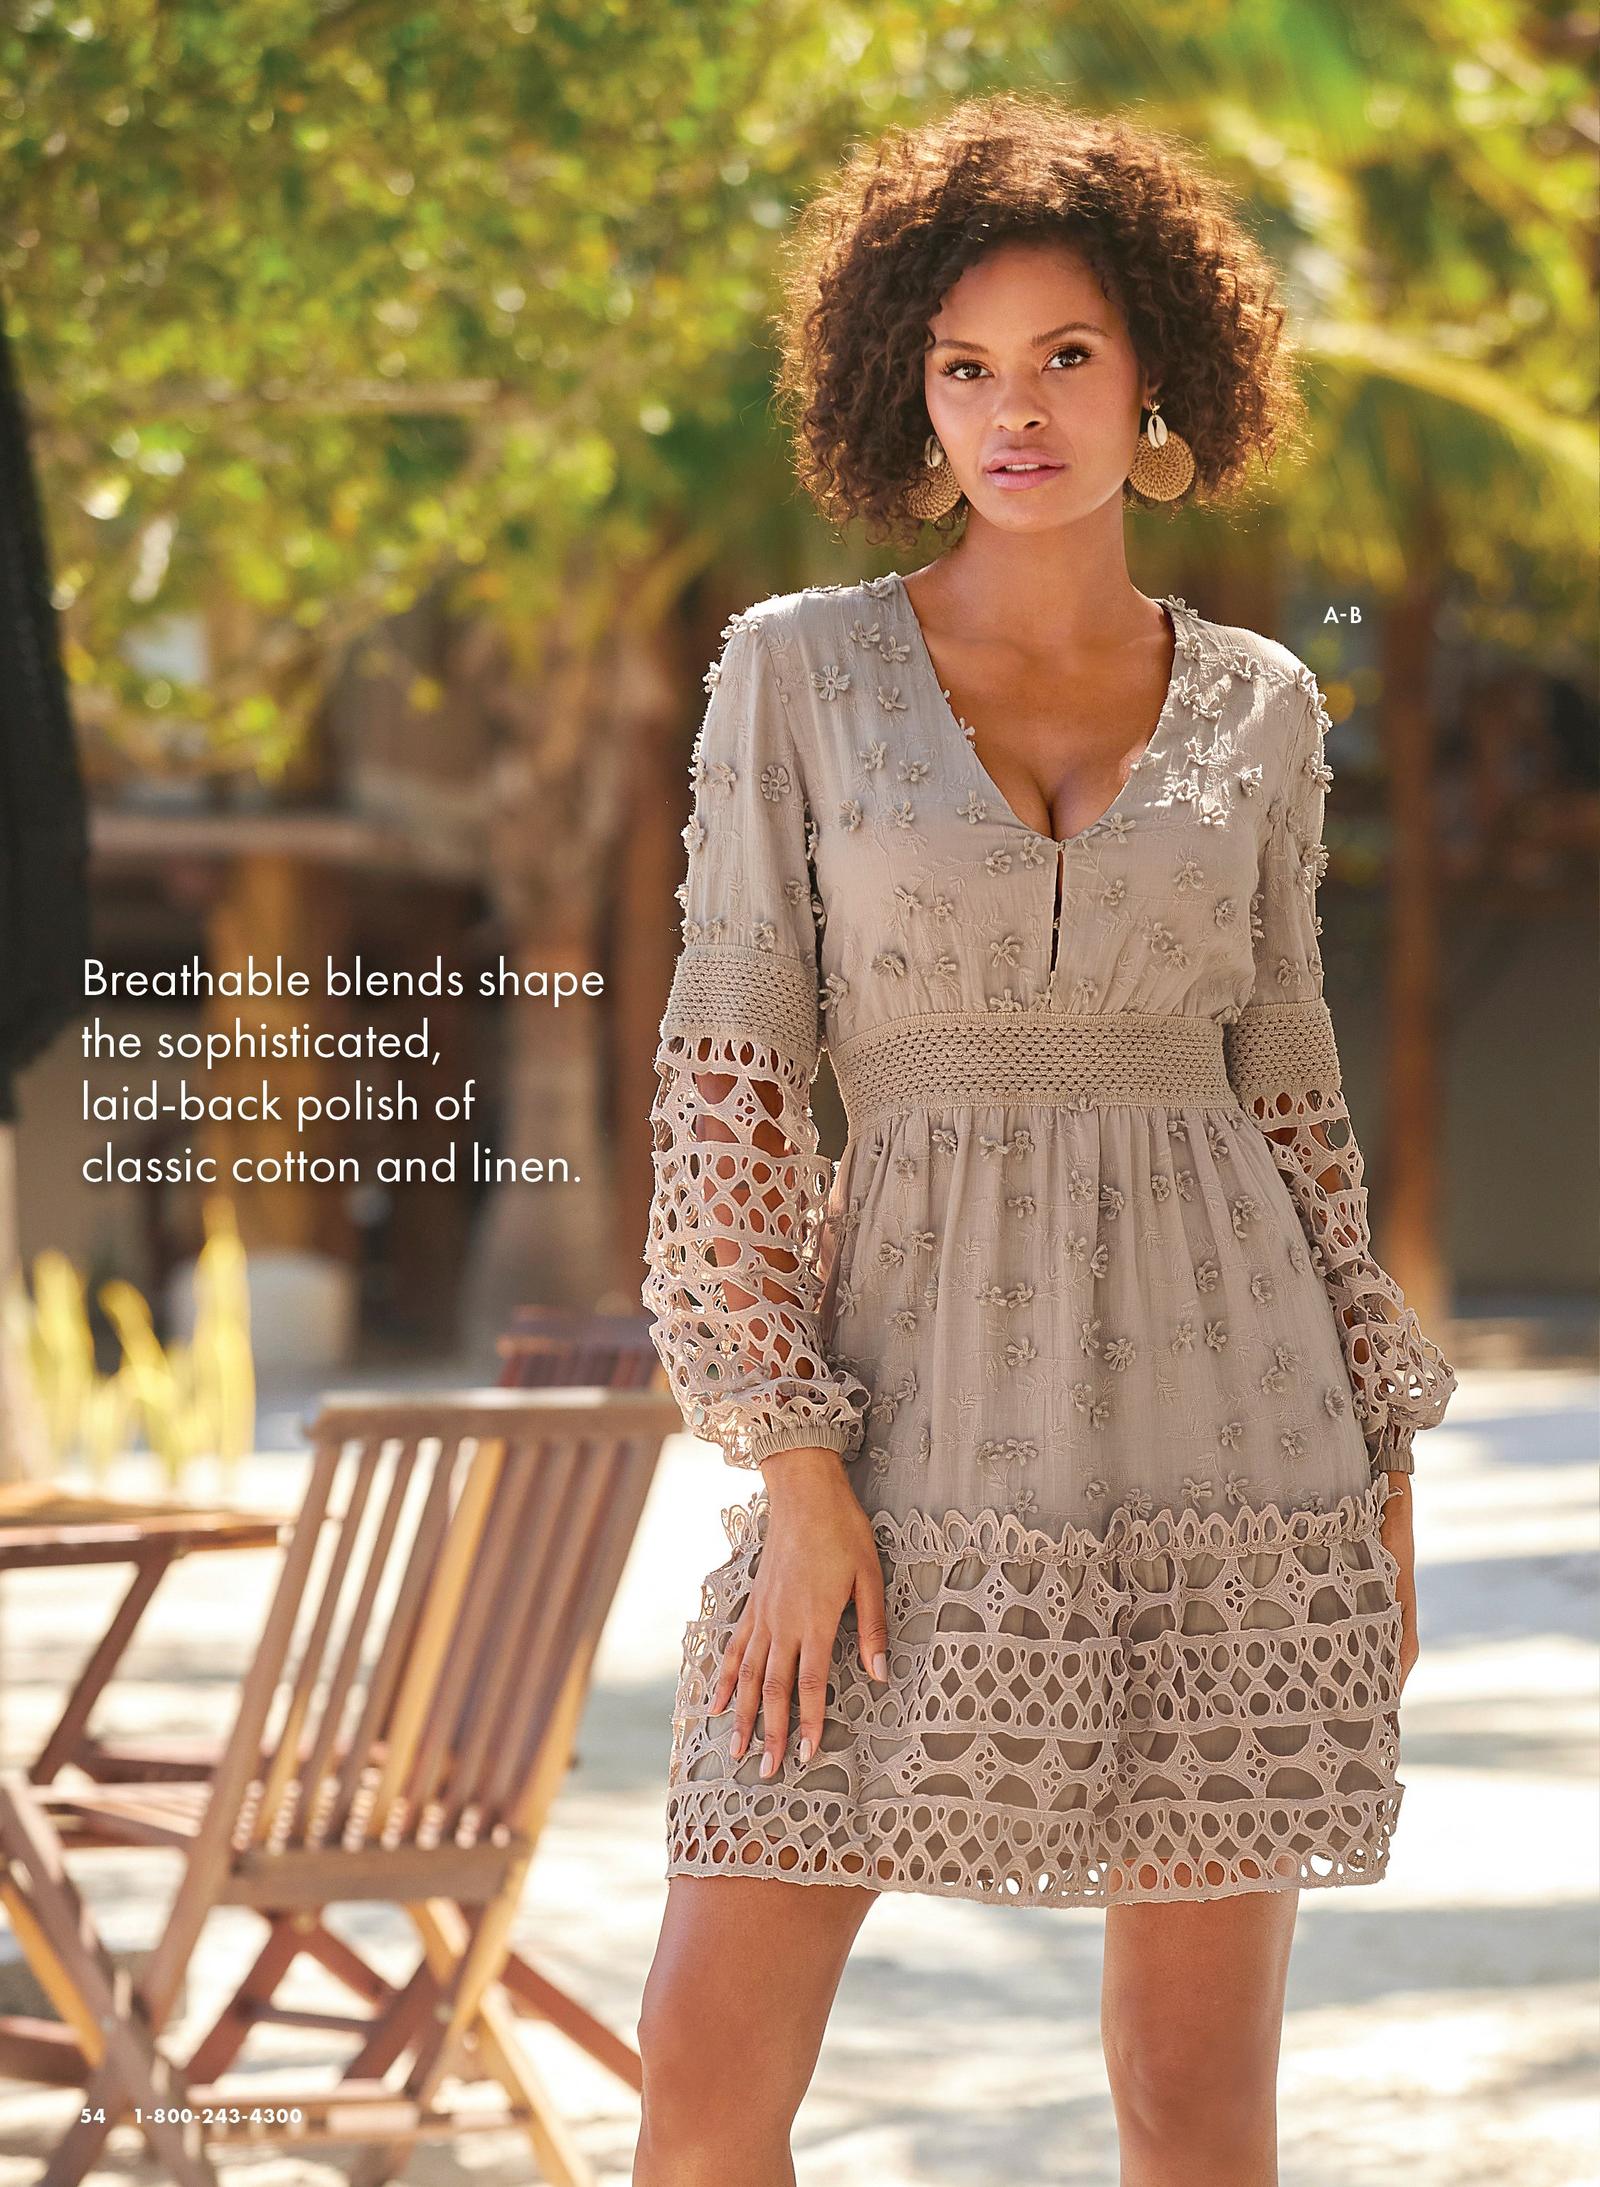 Model is shown wearing the Mixed Media Short Dress in beige with a keyhole detail at the bust, cutout puff sleeves and 3D floral applique. She also wears the Woven Seashell Earrings in tan wicker with shell detail.